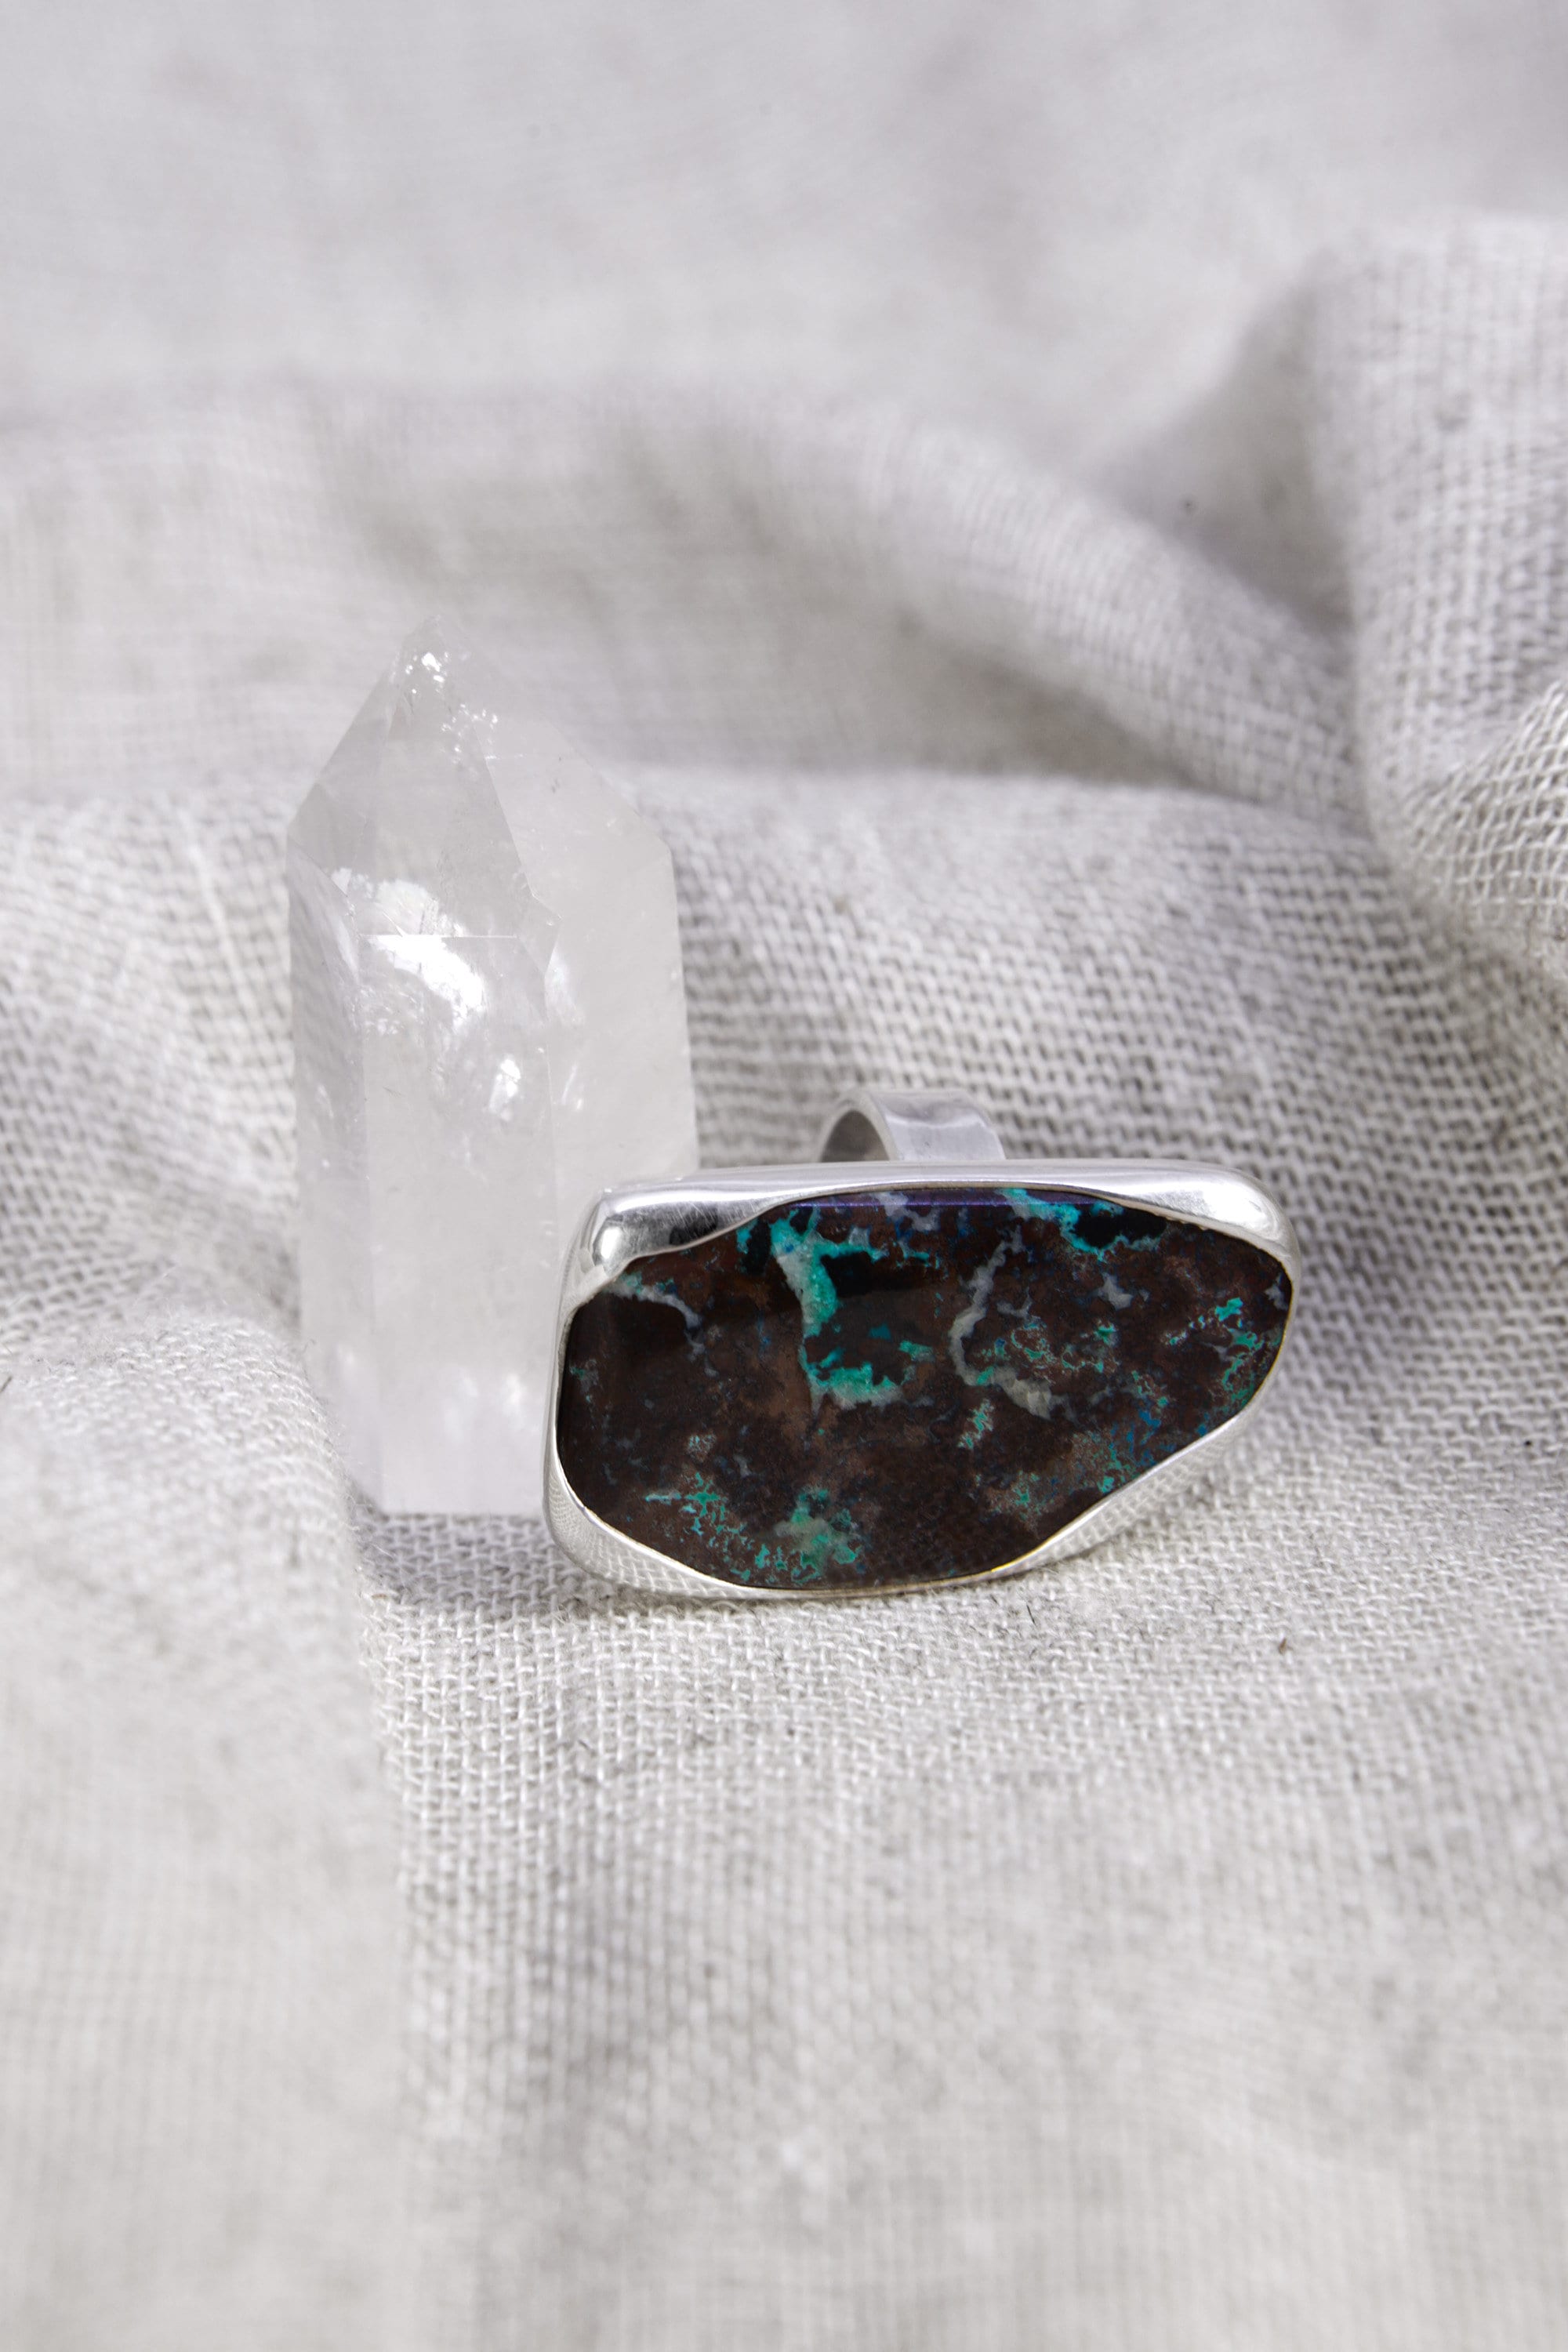 Adjustable Sterling Silver Ring with Rectangular Chrysocolla- Unisex - Size 5-10 US